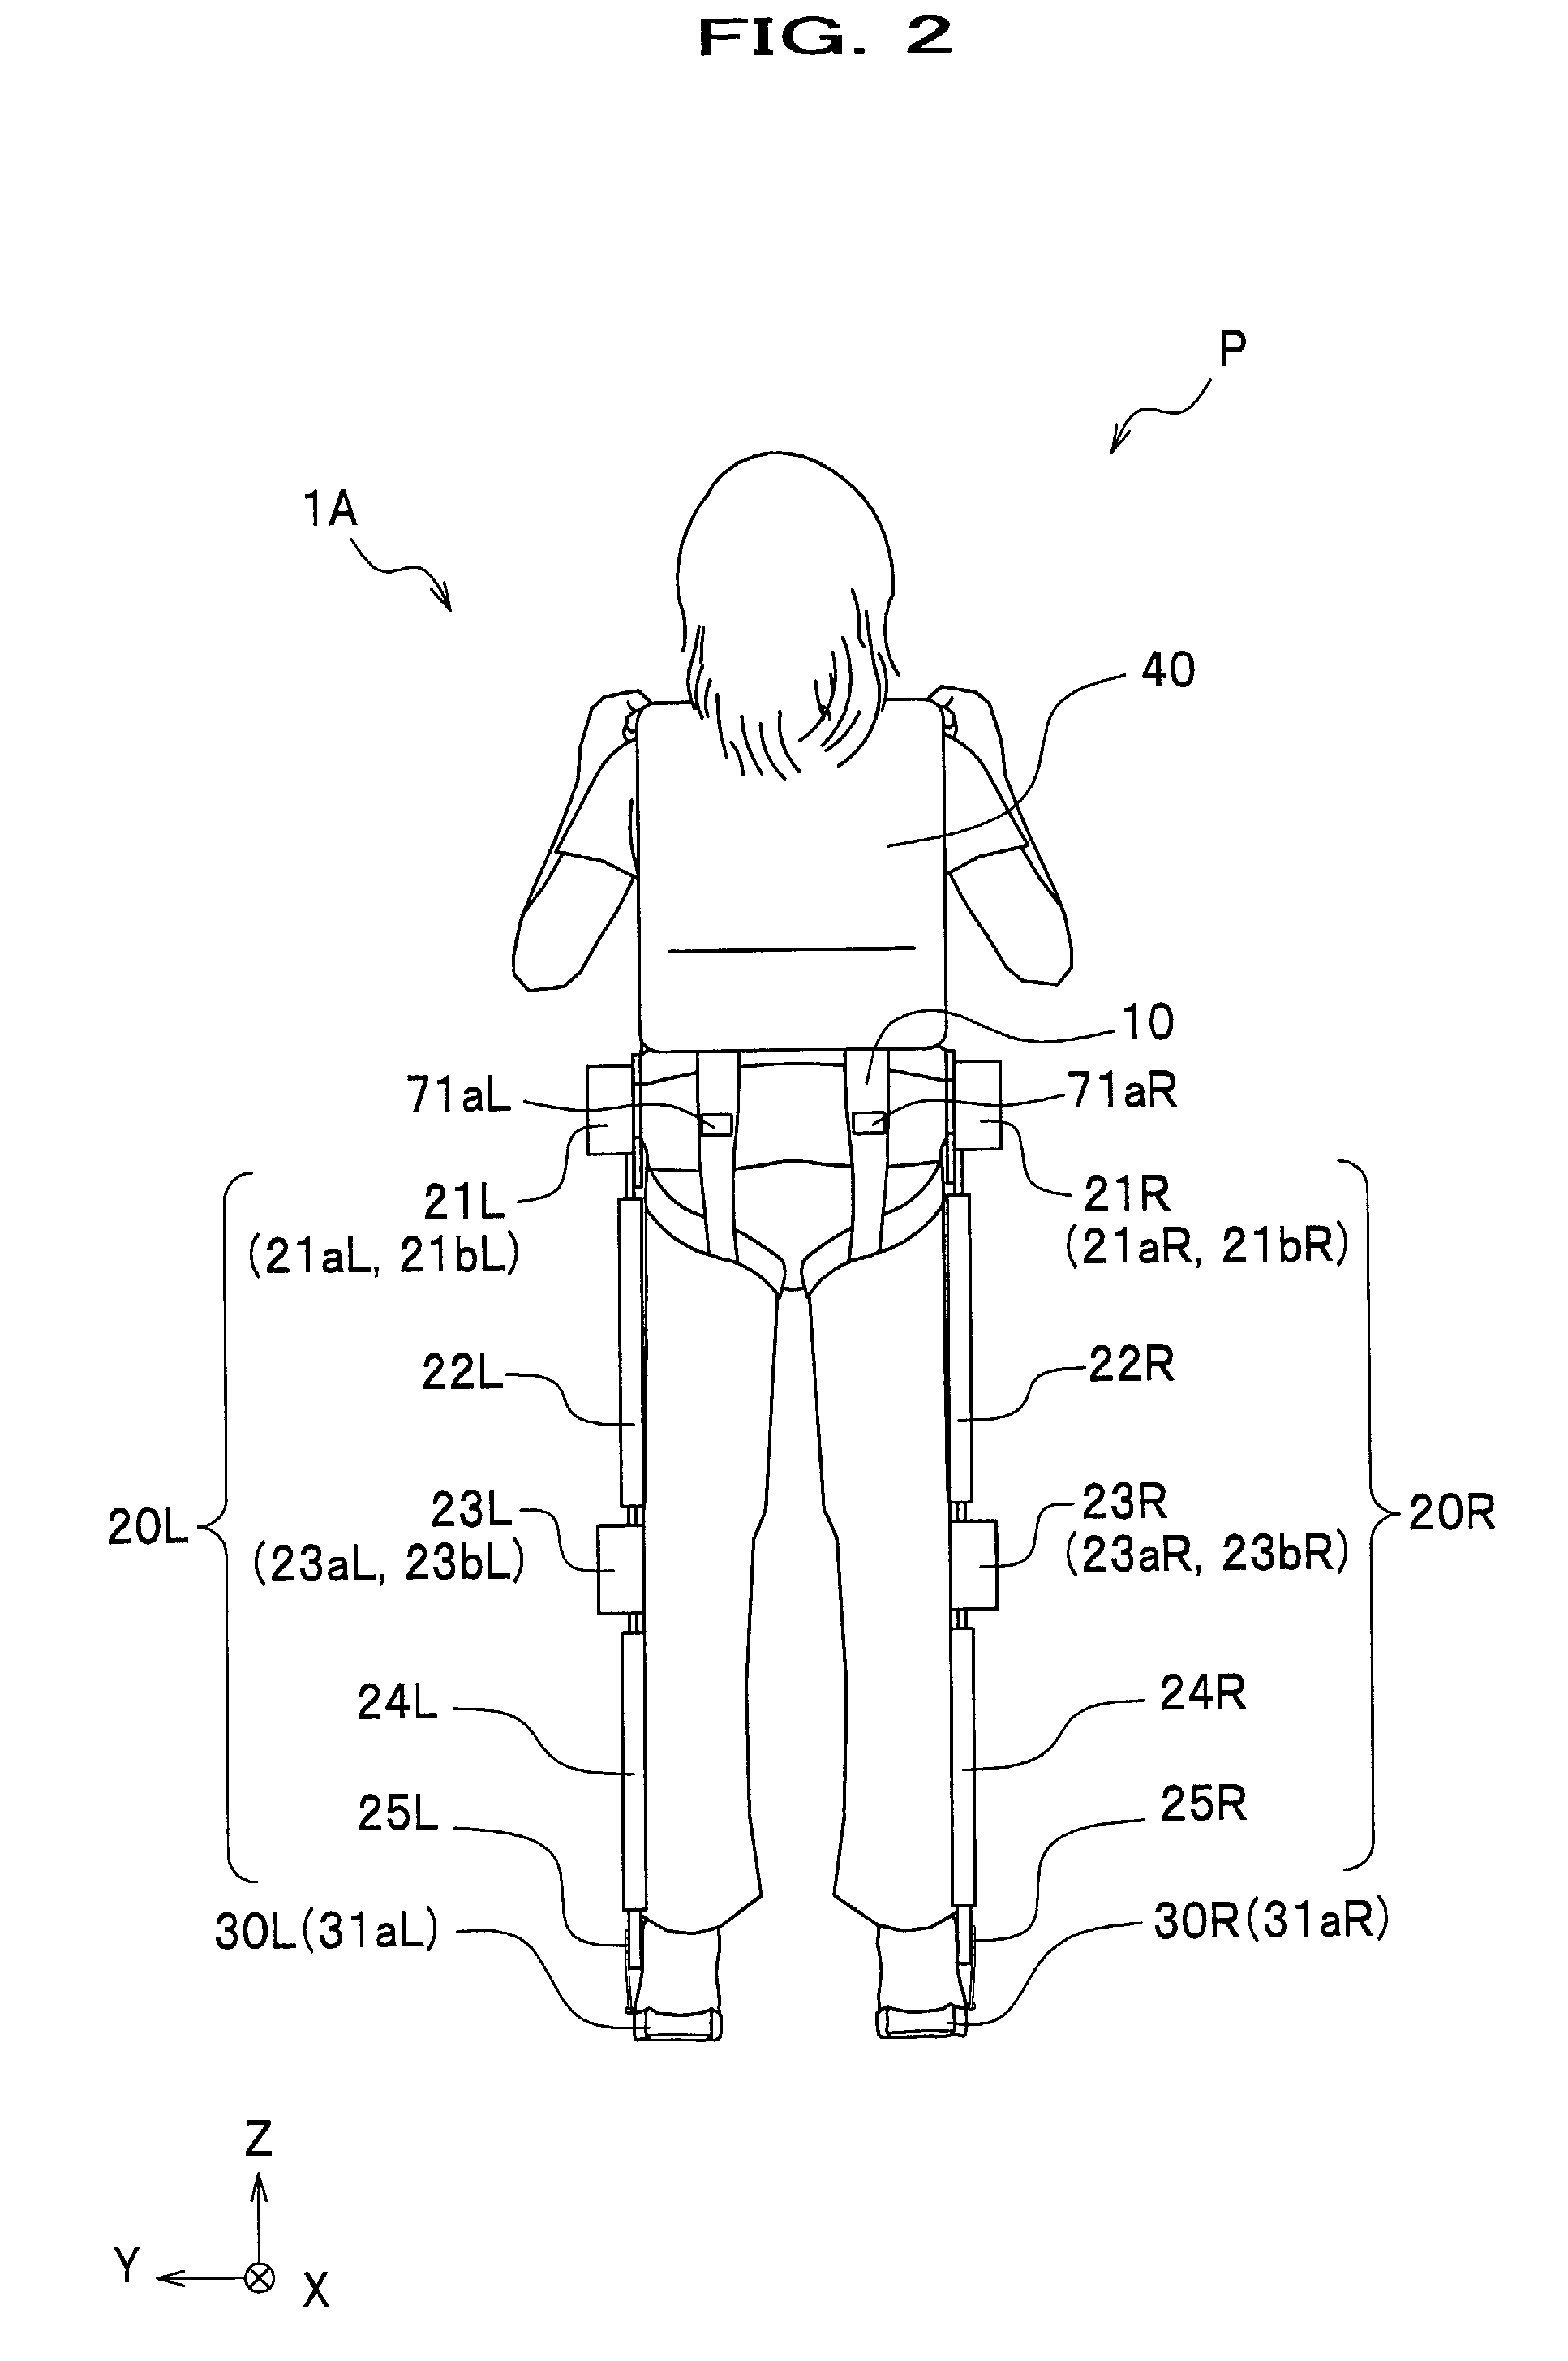 Body weight support device and body weight support program